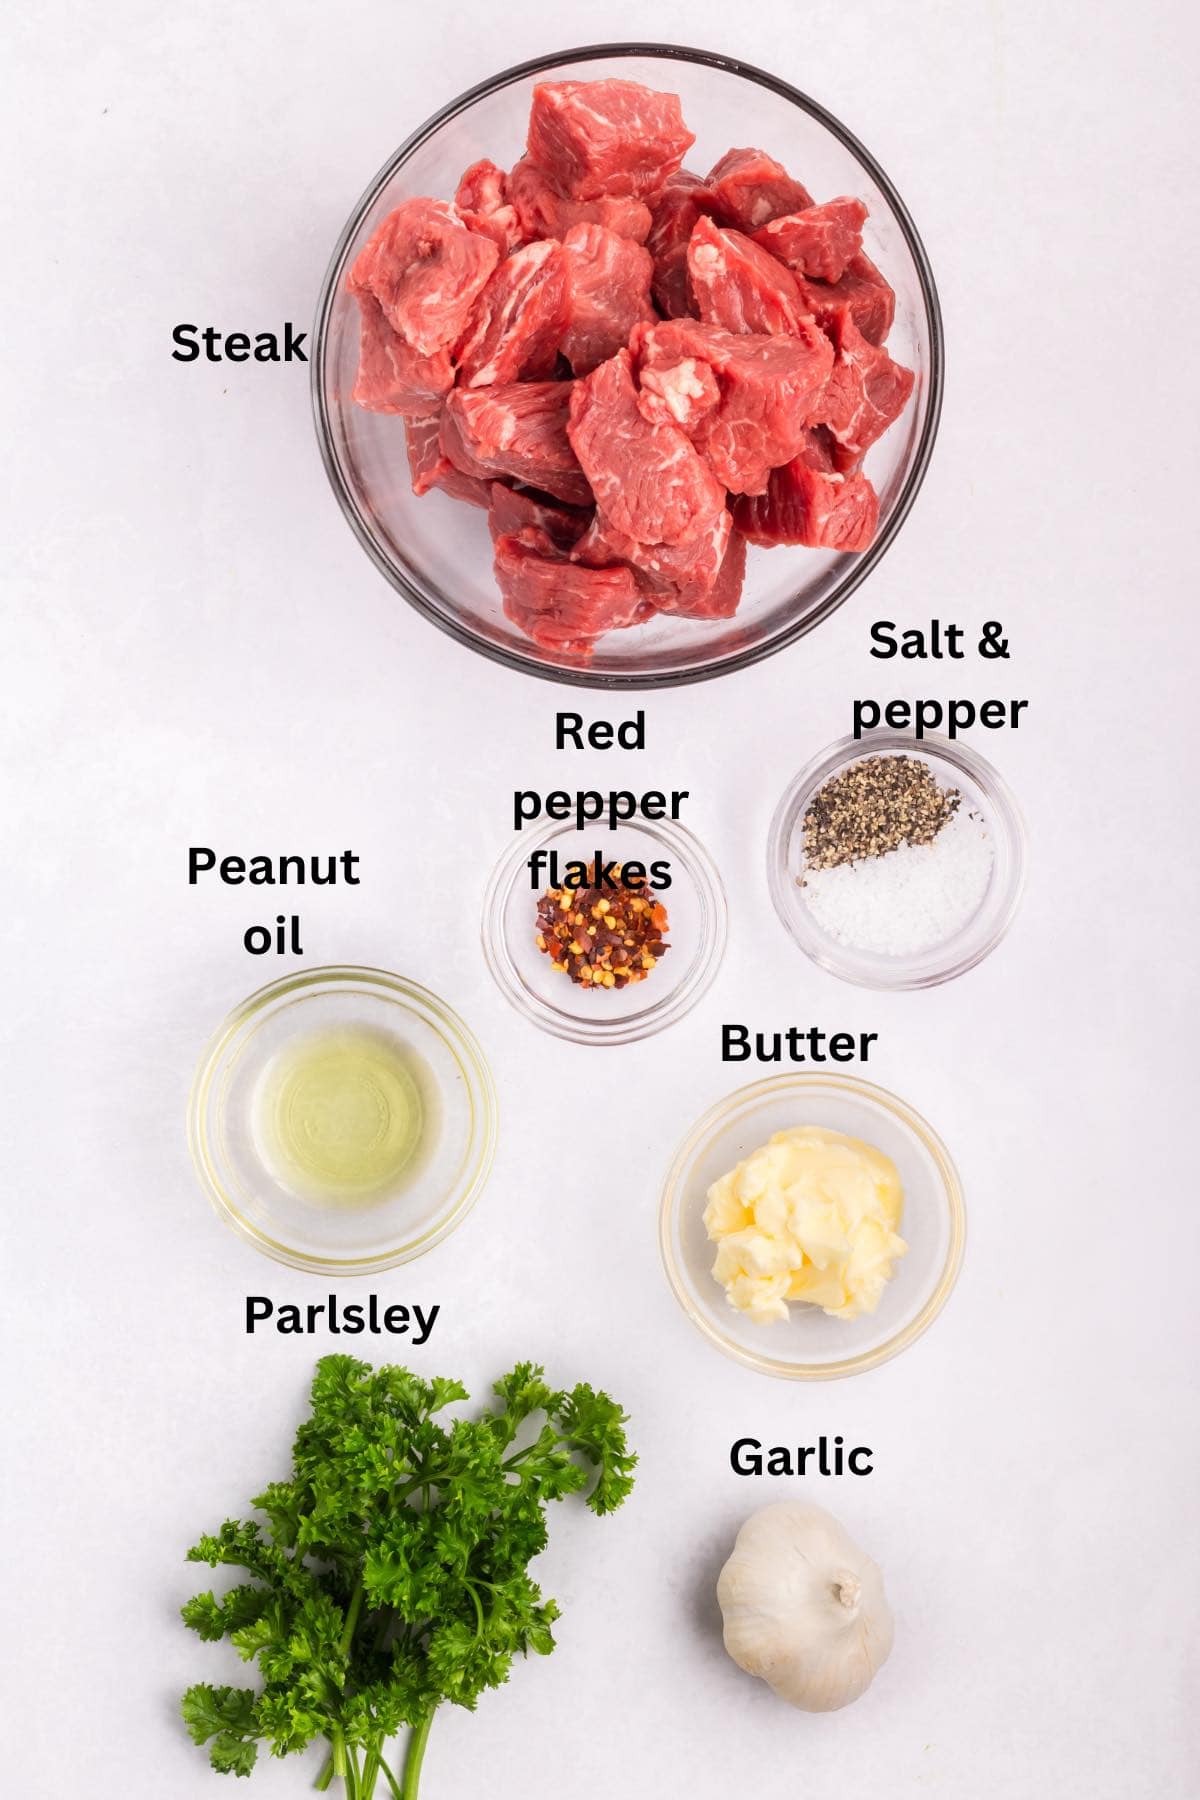 Ingredients for garlic butter steak bites include steak, butter, garlic, parsley and red pepper flakes. 